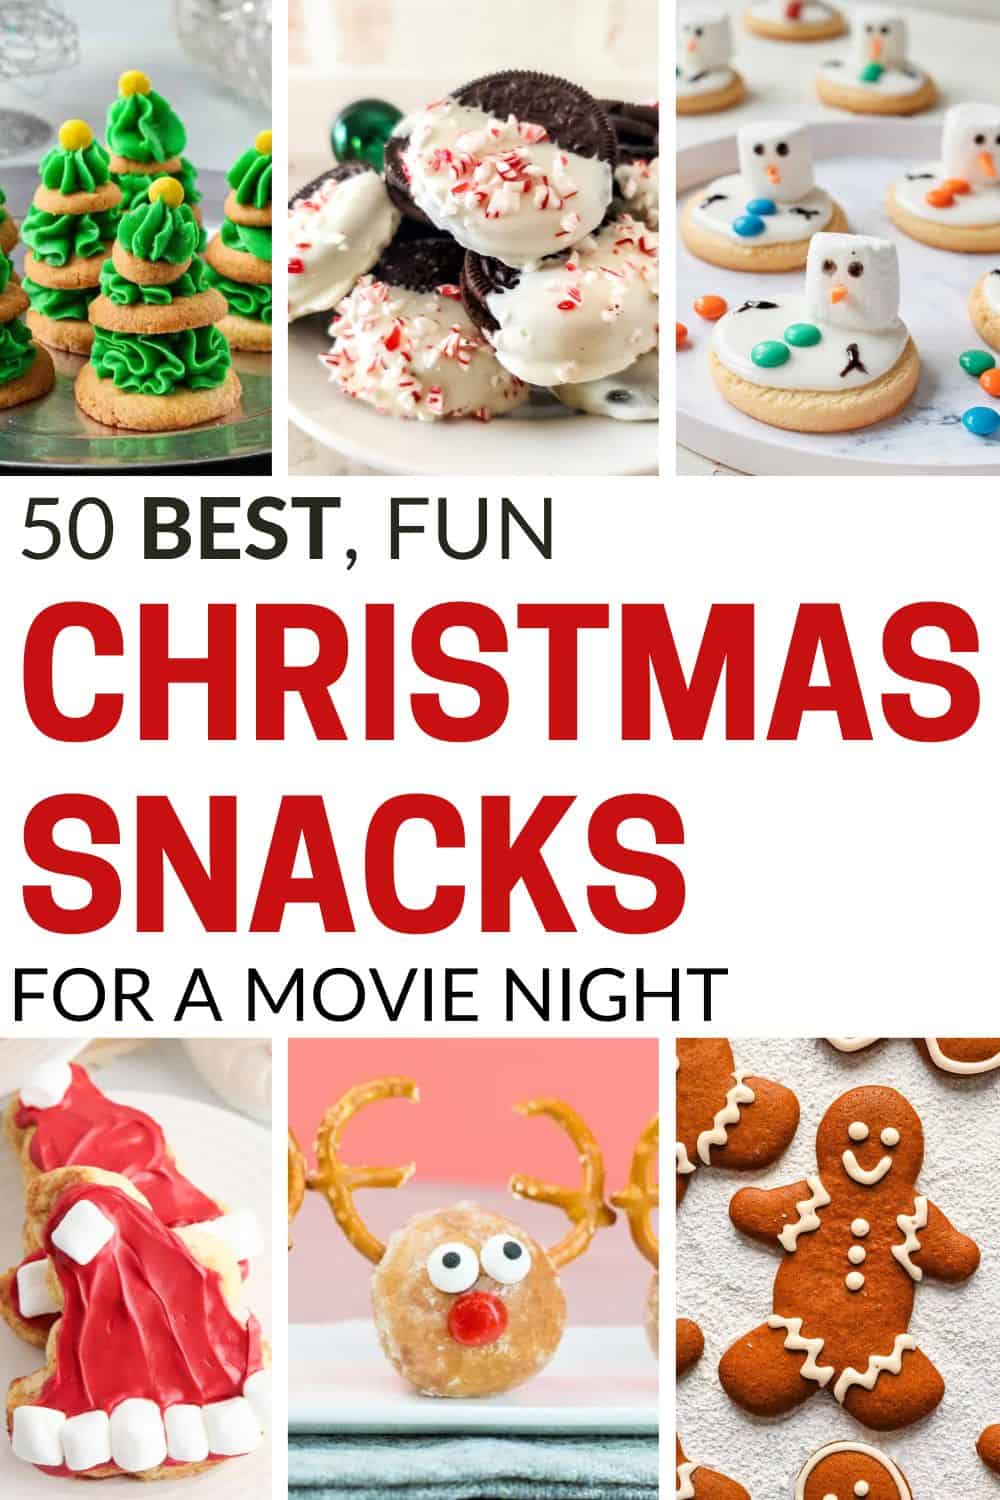 Collage of 6 different recipes - text overlay in the middle says 50 Best, Fun Christmas Snacks for a Movie Night